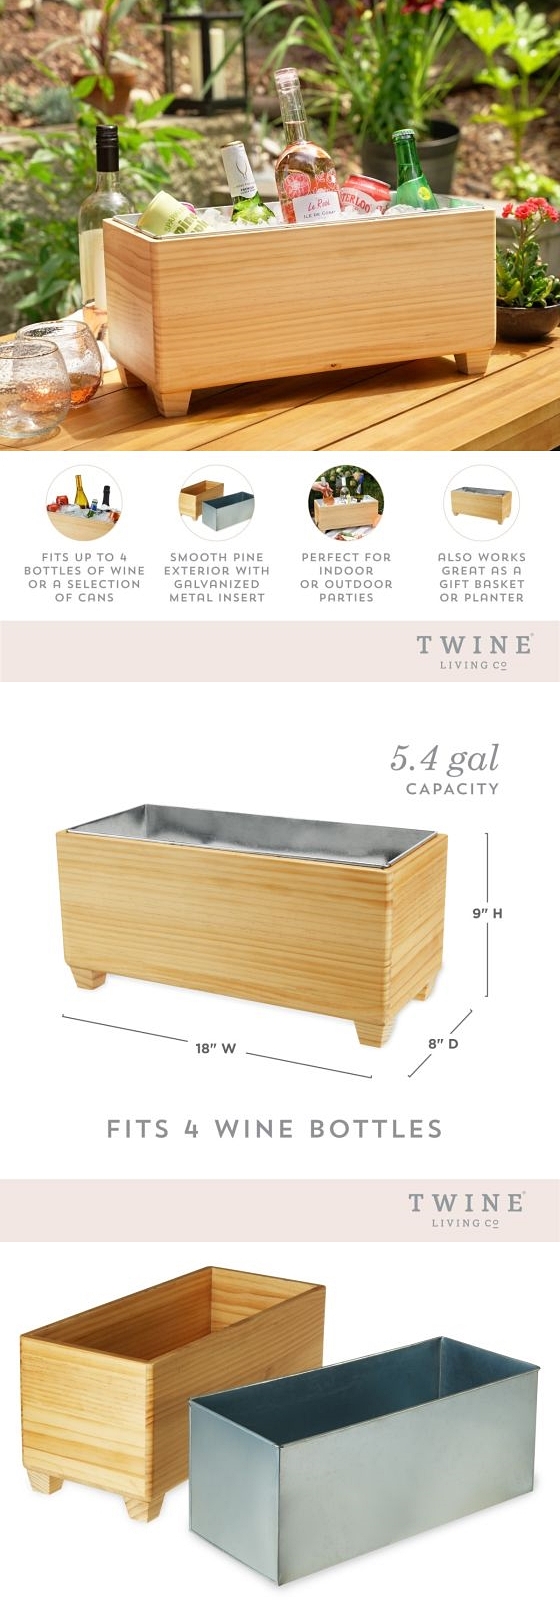 Wooden Beverage Tub with Galvanized-Metal Insert by Twine Living